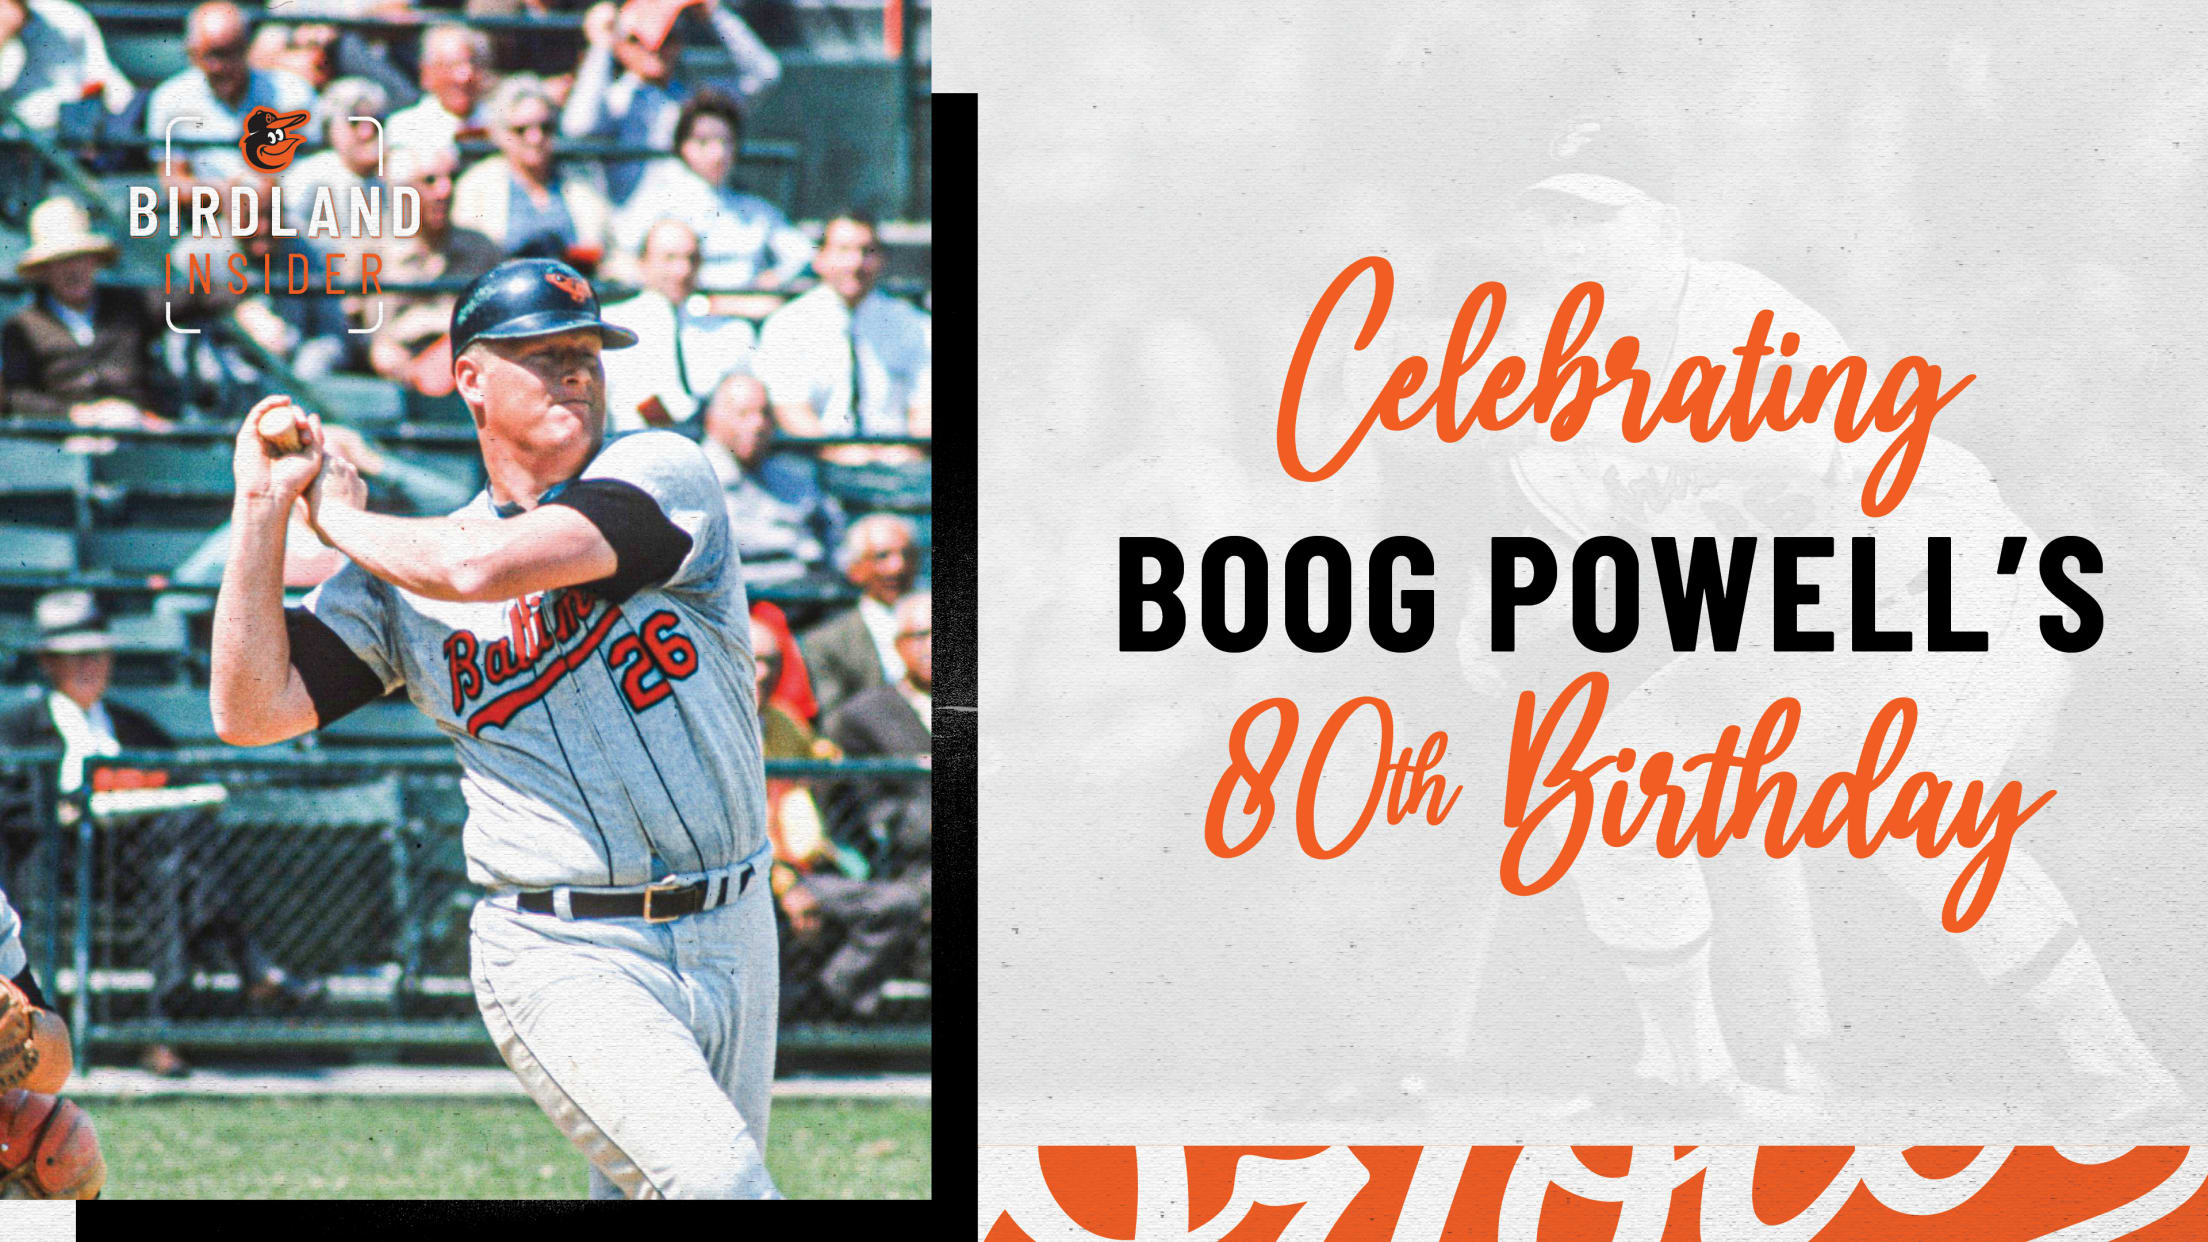 Boog Powell, Baltimore Oriole Legend, BBQ King - Images